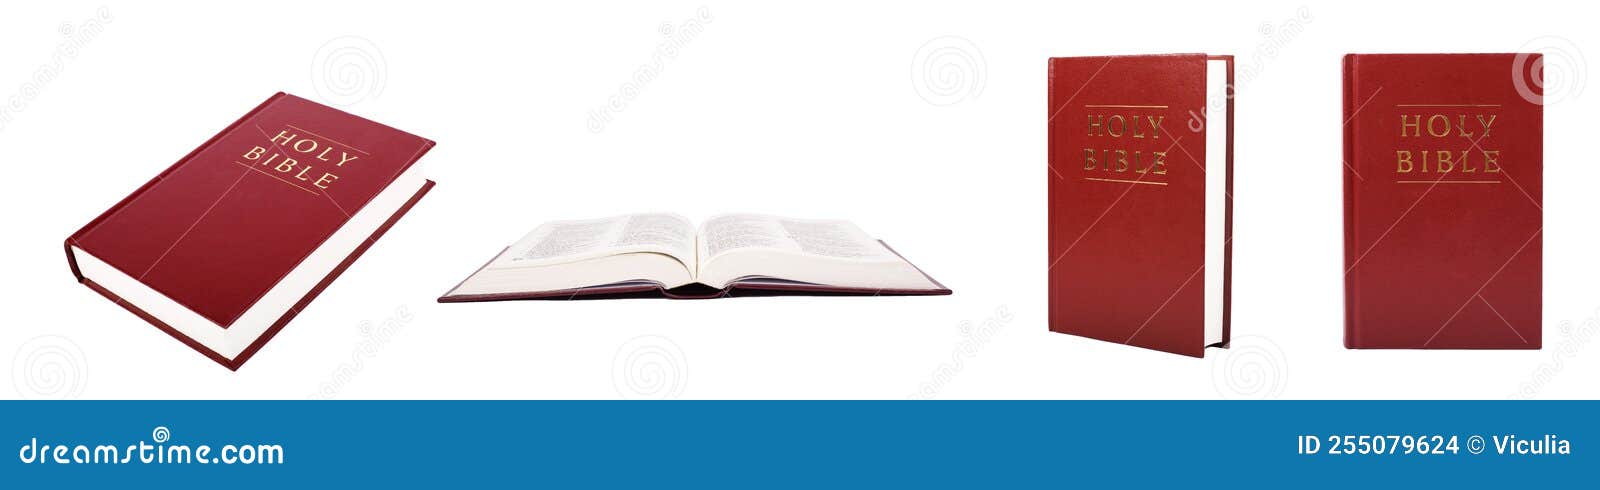 bible with red cover color  on white background.